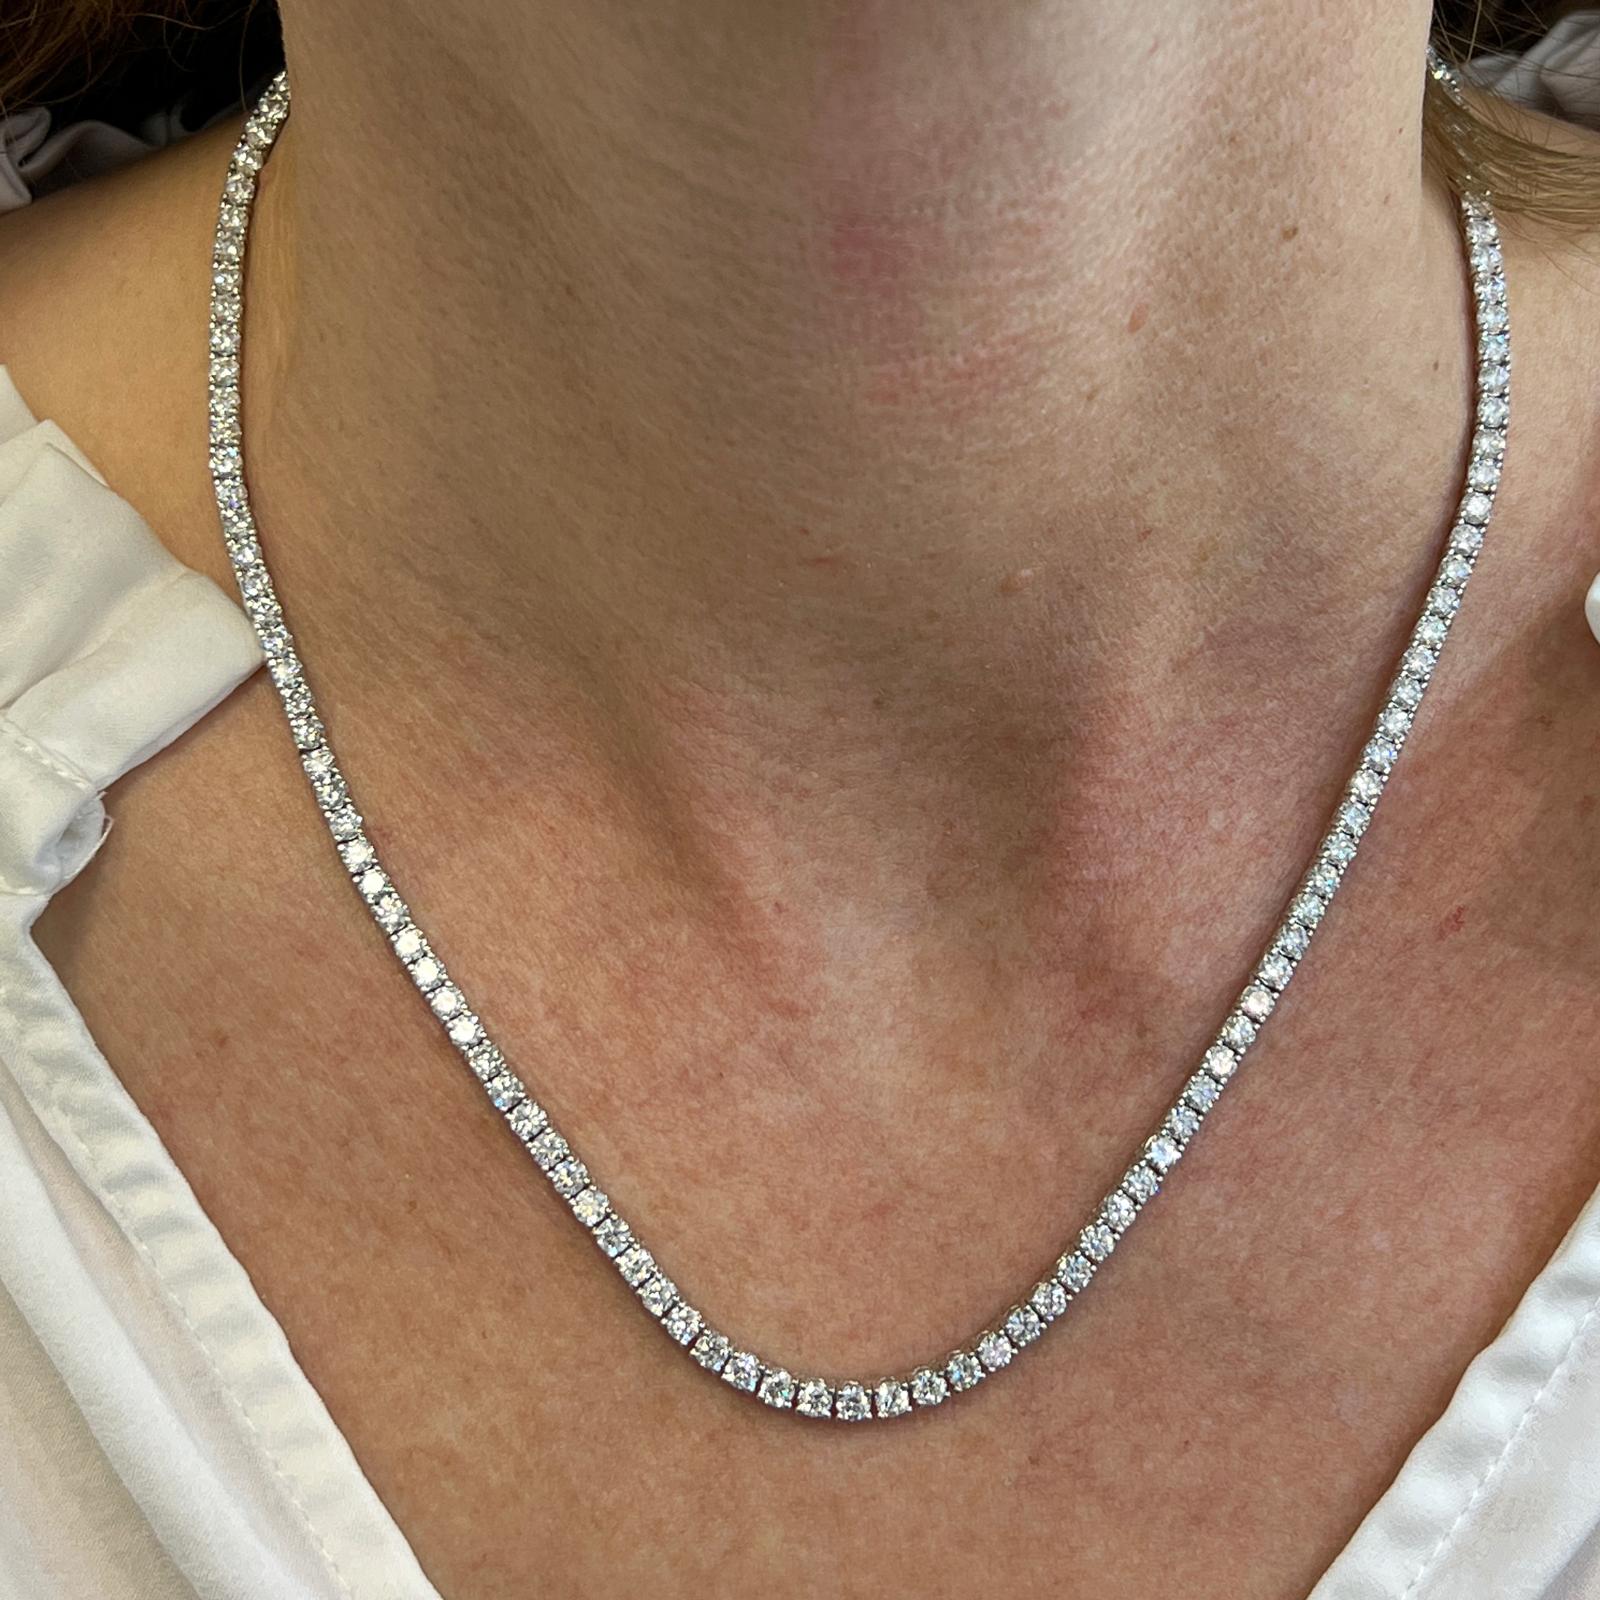 Stunning new diamond tennis necklace crafted in 14 karat white gold. The necklace features 136 round brilliant cut diamonds weighing 11.04 carat total weight. The diamonds are brilliant and graded H-I color and SI clarity. The necklace measures 16